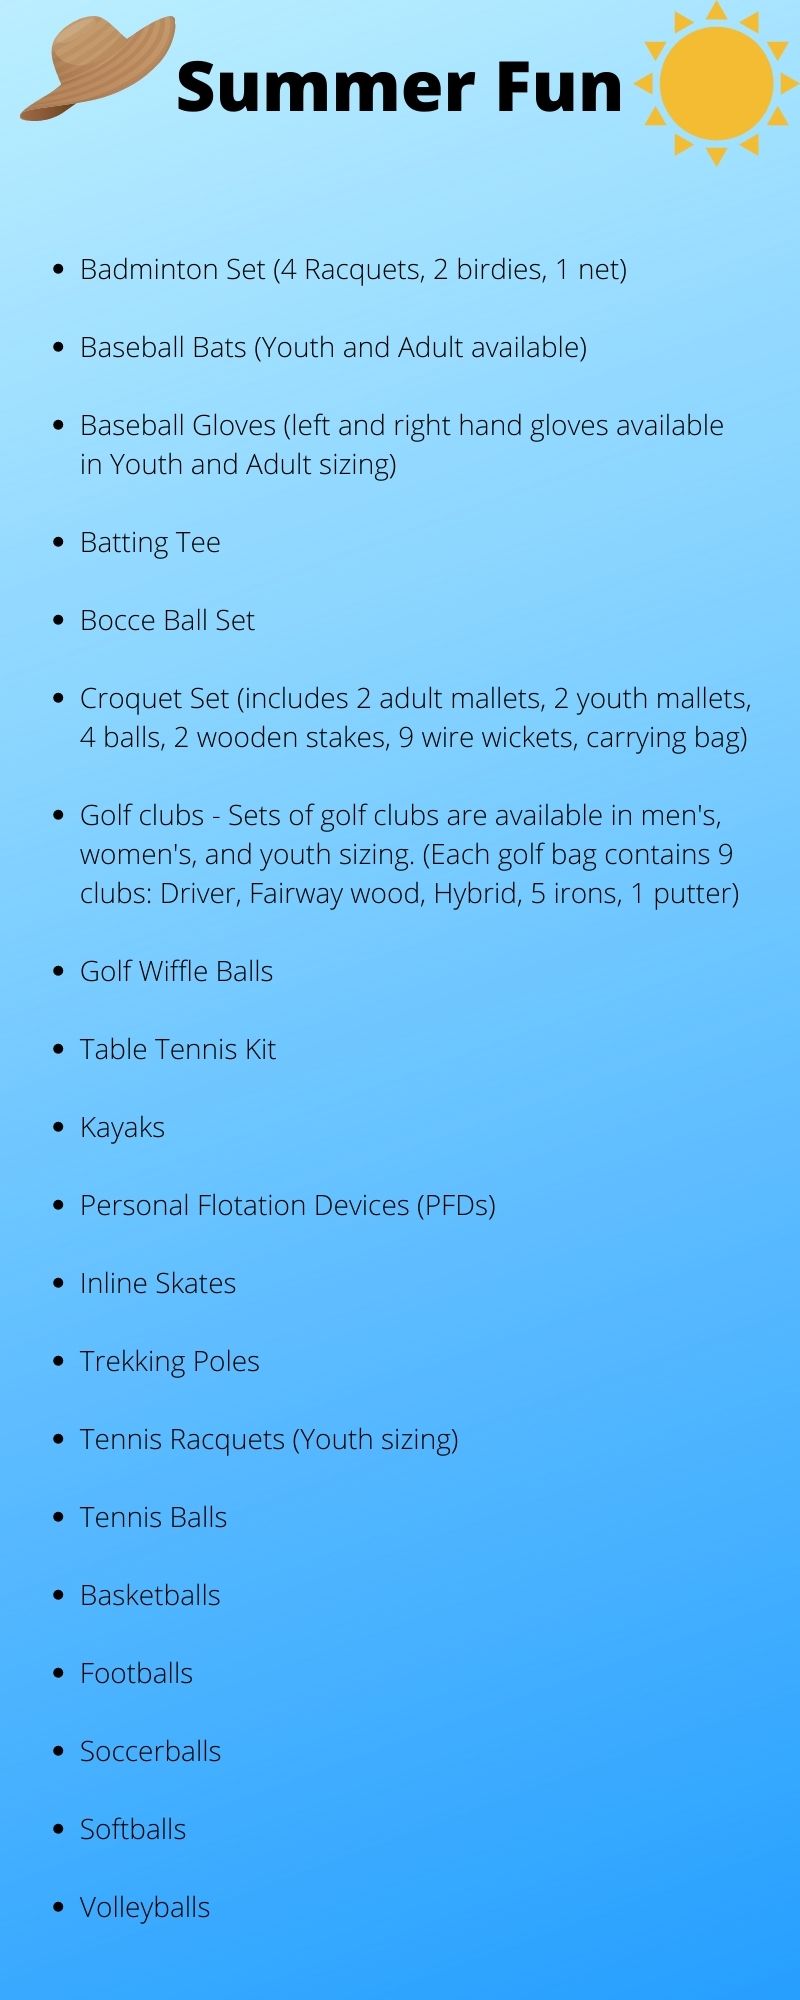 List of summer recreation equipment available: Badminton Set (4 Racquets, 2 birdies, 1 net) Baseball Bats (Youth and Adult available) Baseball Gloves (left and right hand gloves available in Youth and Adult sizing) Batting Tee Bocce Ball Set Croquet Set (includes 2 adult mallets, 2 youth mallets, 4 balls, 2 wooden stakes, 9 wire wickets, carrying bag) Golf clubs - Sets of golf clubs are available in men's, women's, and youth sizing. (Each golf bag contains 9 clubs: Driver, Fairway wood, Hybrid, 5 irons, 1 putter) Golf Wiffle Balls Table Tennis Kit Kayaks Personal Flotation Devices (PFDs) Inline Skates Trekking Poles Tennis Racquets (Youth sizing) Tennis Balls Basketballs Footballs Soccerballs Softballs Volleyballs